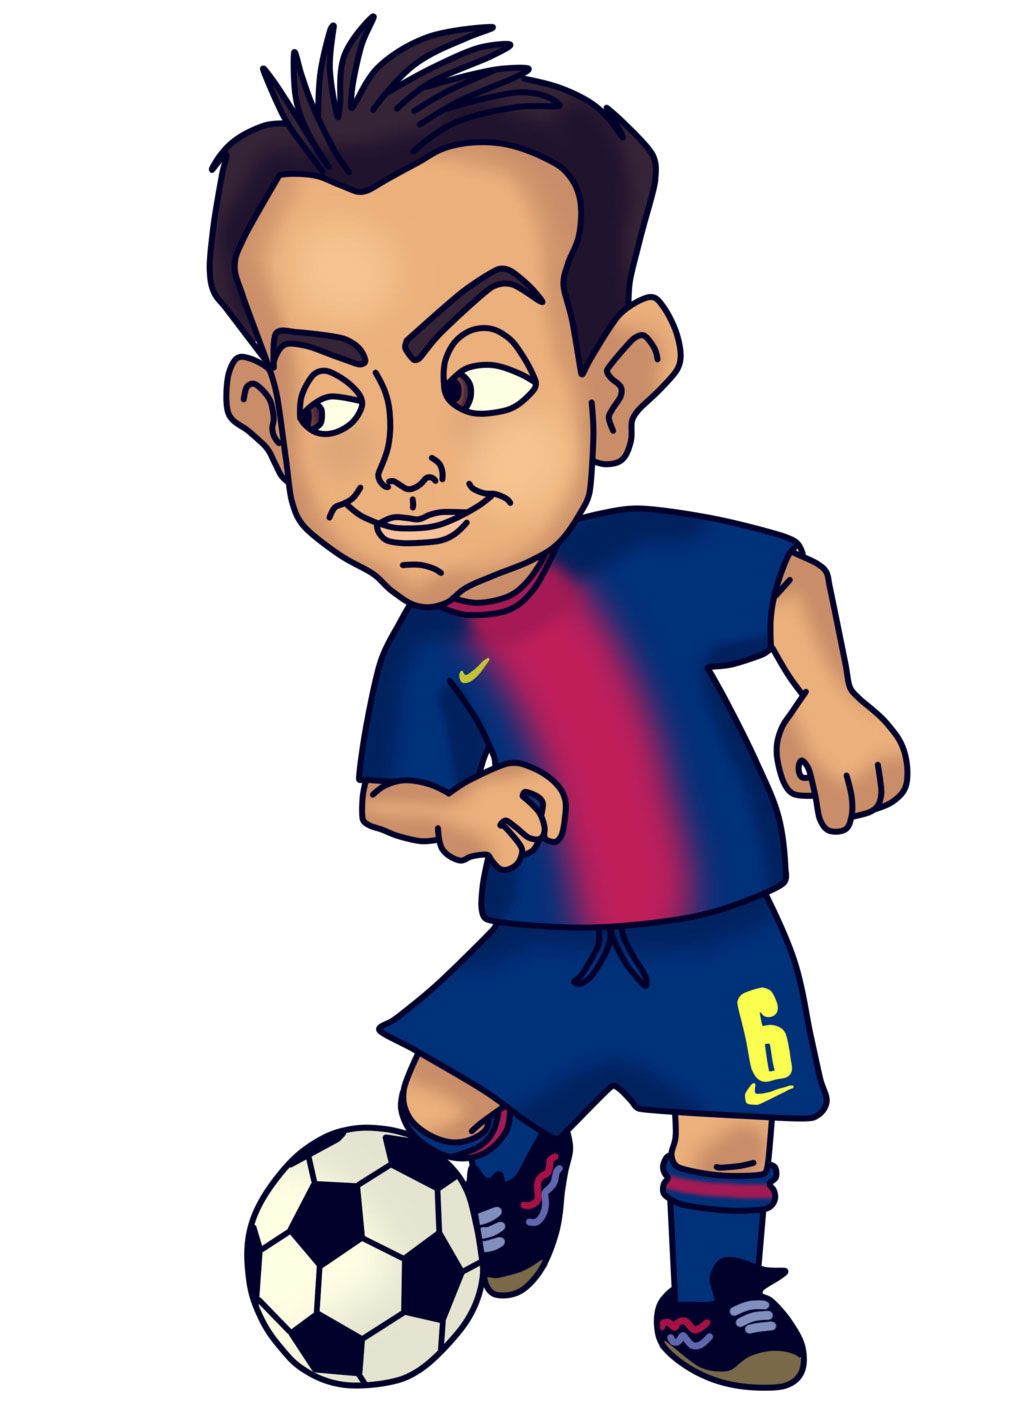 Free Funny Football Cartoons, Download Free Clip Art, Free Clip Art on Clipart Library